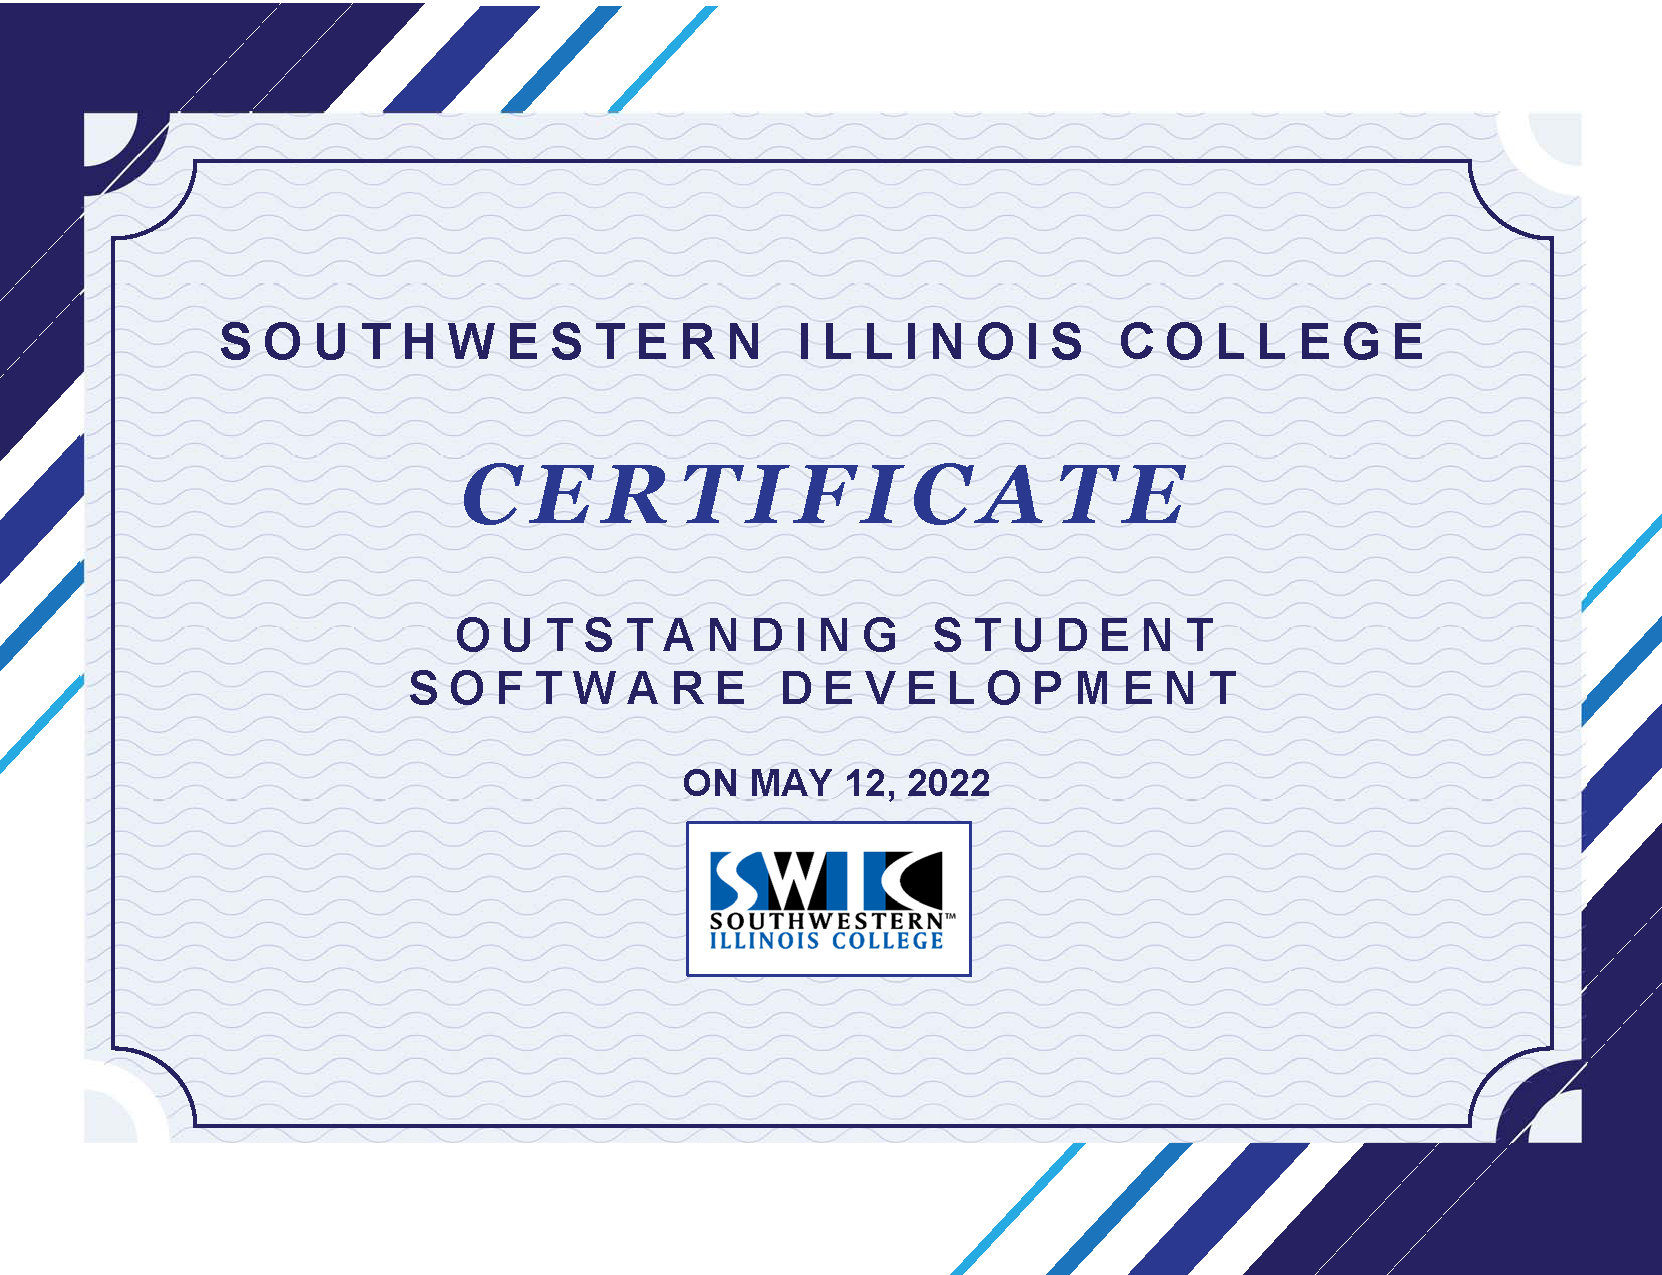 Southwestern Illinois College Certificate Outstanding Student Software Development